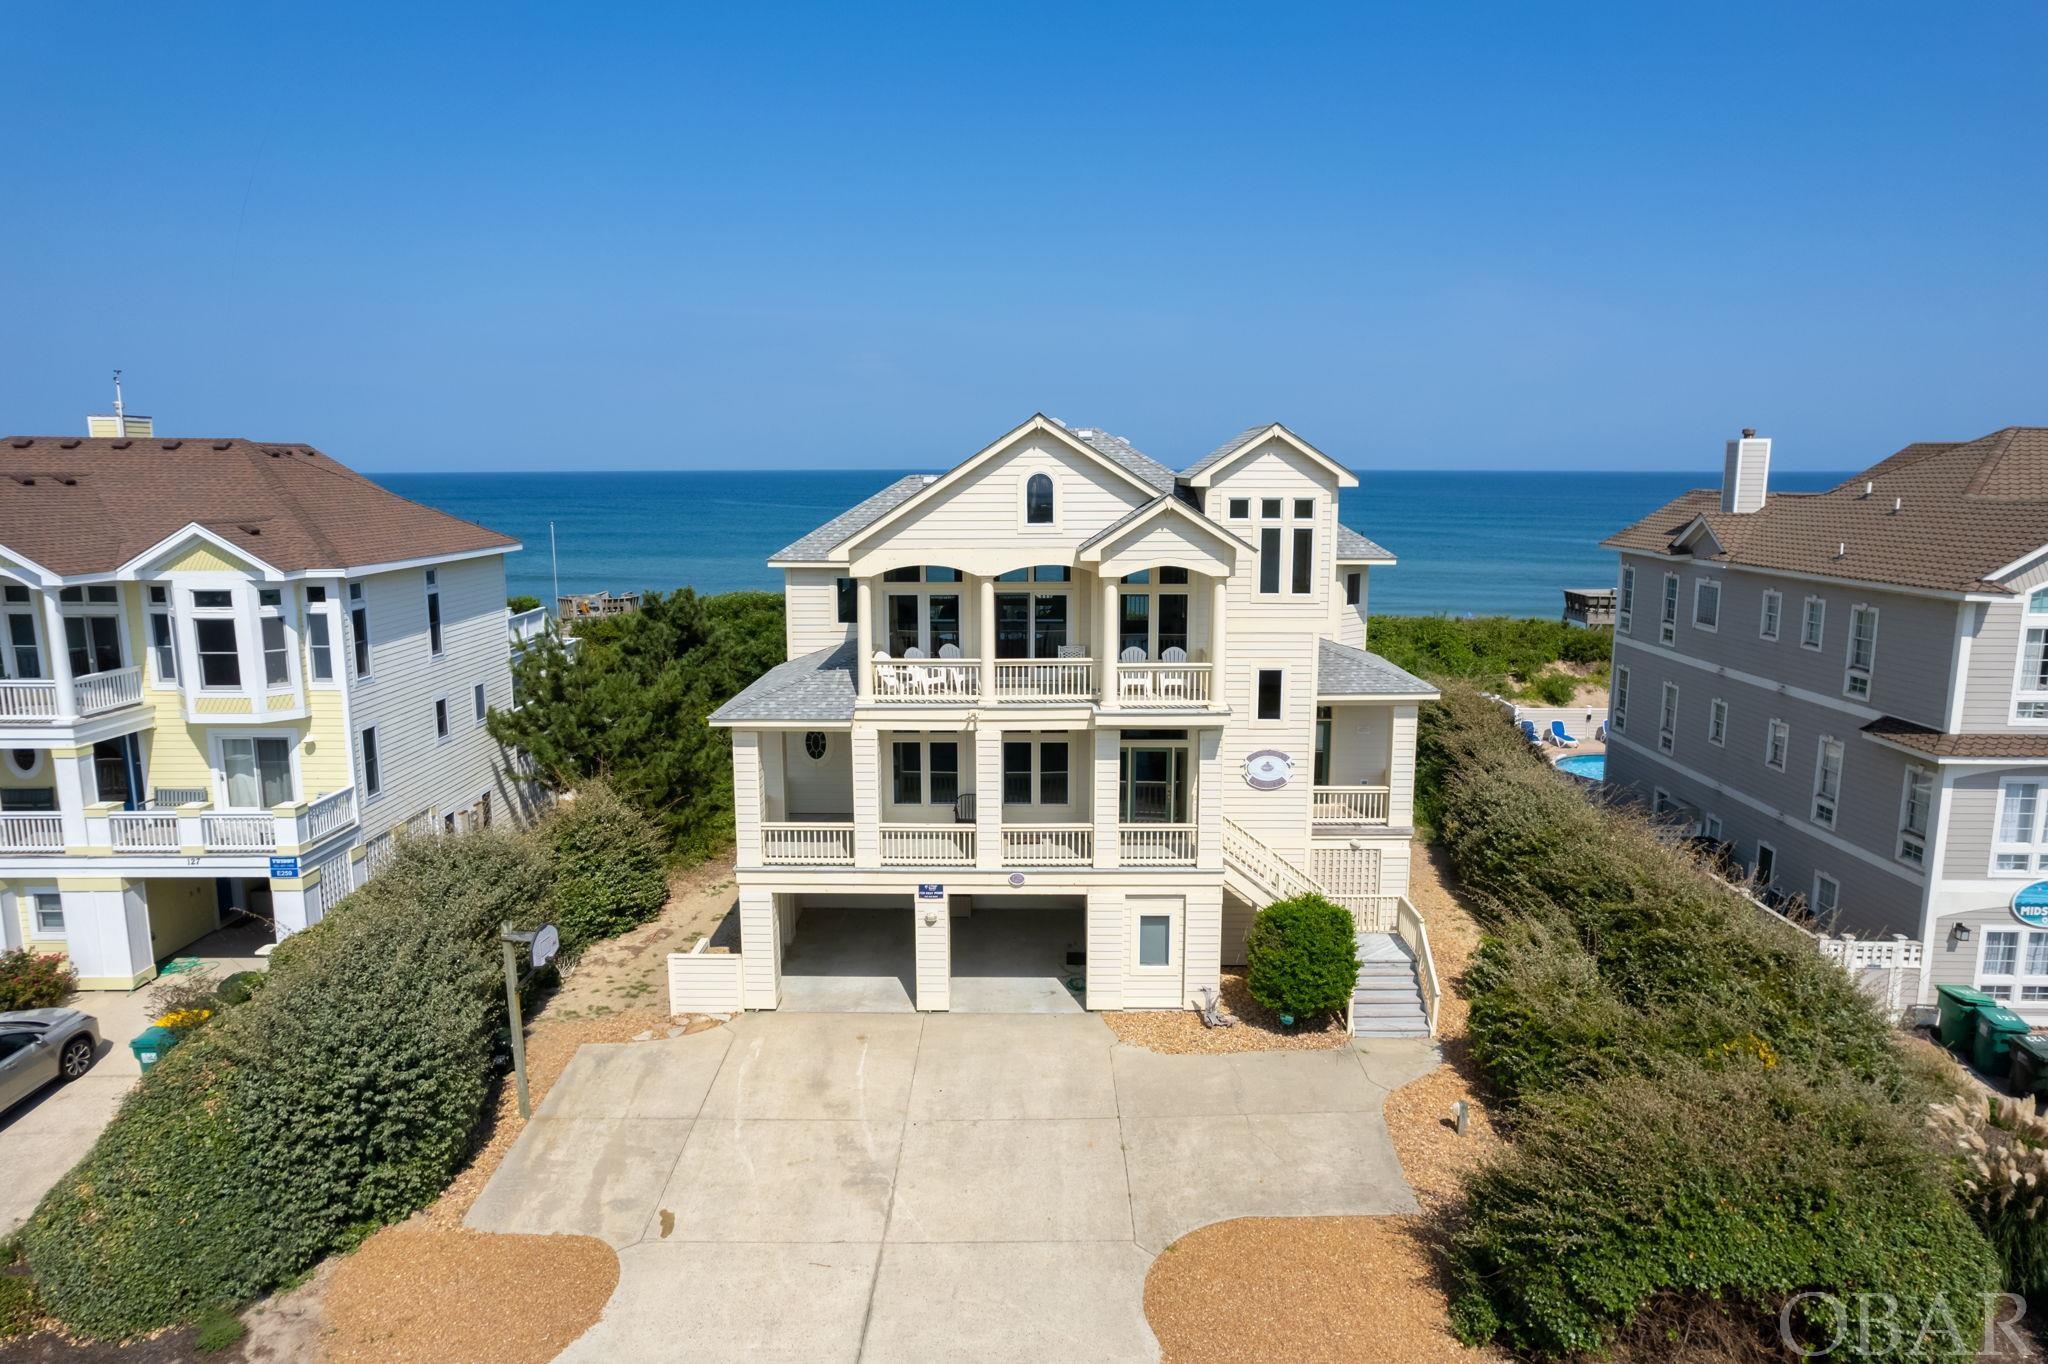 Breathtaking ocean and sound views can be yours with this 6 bedroom, 5.5 bath home located in prestigious Pine Island.  This exquisite home features a large open floor plan, cathedral ceilings, ships watch, wainscotting throughout the hallways and stairwells, multiple decks on both the east and west elevations, game room with kitchenette, pool, hot tub, and private walkway to the beach with a dune top deck.  Fronted by the Currituck Sound and Audubon Nature Preserve, and flanked by the Atlantic Ocean, this 4500+ square foot vacation home is all about the views.   The cathedral ceilings and oversized windows on the upper level bring light and panoramic views into every corner.  The unbroken sightlines run from the Great Room with oceanside sun deck, into the designated dining area with covered sound side balcony, into the kitchen with its abundance of counter space and additional seating in the breakfast nook and island.  Adjacent to the kitchen is a convenient pantry and a powder room. The midlevel features 3 en Suite bedrooms, all with private bathrooms complete with double sinks and jet tubs.  Two of these large bedrooms offer ocean views and covered deck access, and one even has access to the sound side covered deck.  The third en Suite offers views out over the Nature Preserve and Sound.   Additional guest rooms are on the ground level connected by the game room with a kitchenette.  A pyramid bunk room with covered porch access is next to a full hall bath on one side of the game room, and a double pyramid bunk room shares a full bath with another large bedroom with covered porch access on the other. But there’s more!  Outside is the expansive pool and hot tub area befitting a home of this size.  (The outside shower and convenient outside half bath are adjacent.)  The 16x30 saltwater Gunite pool is the perfect spot to cool off after a day spent on the uncrowded beach.  The dune top deck at the end of the private walkway offers a relaxing resting place to enjoy the magnificent ocean views with a picnic lunch or evening cocktail.   An array of amenities are offered in this upscale Pine Island community, including 2 outdoor pools, beach club, tennis, volleyball, and more.  Located between Corolla and Duck, the central location affords an easy route to the unique attractions, dining, and shopping of both communities.